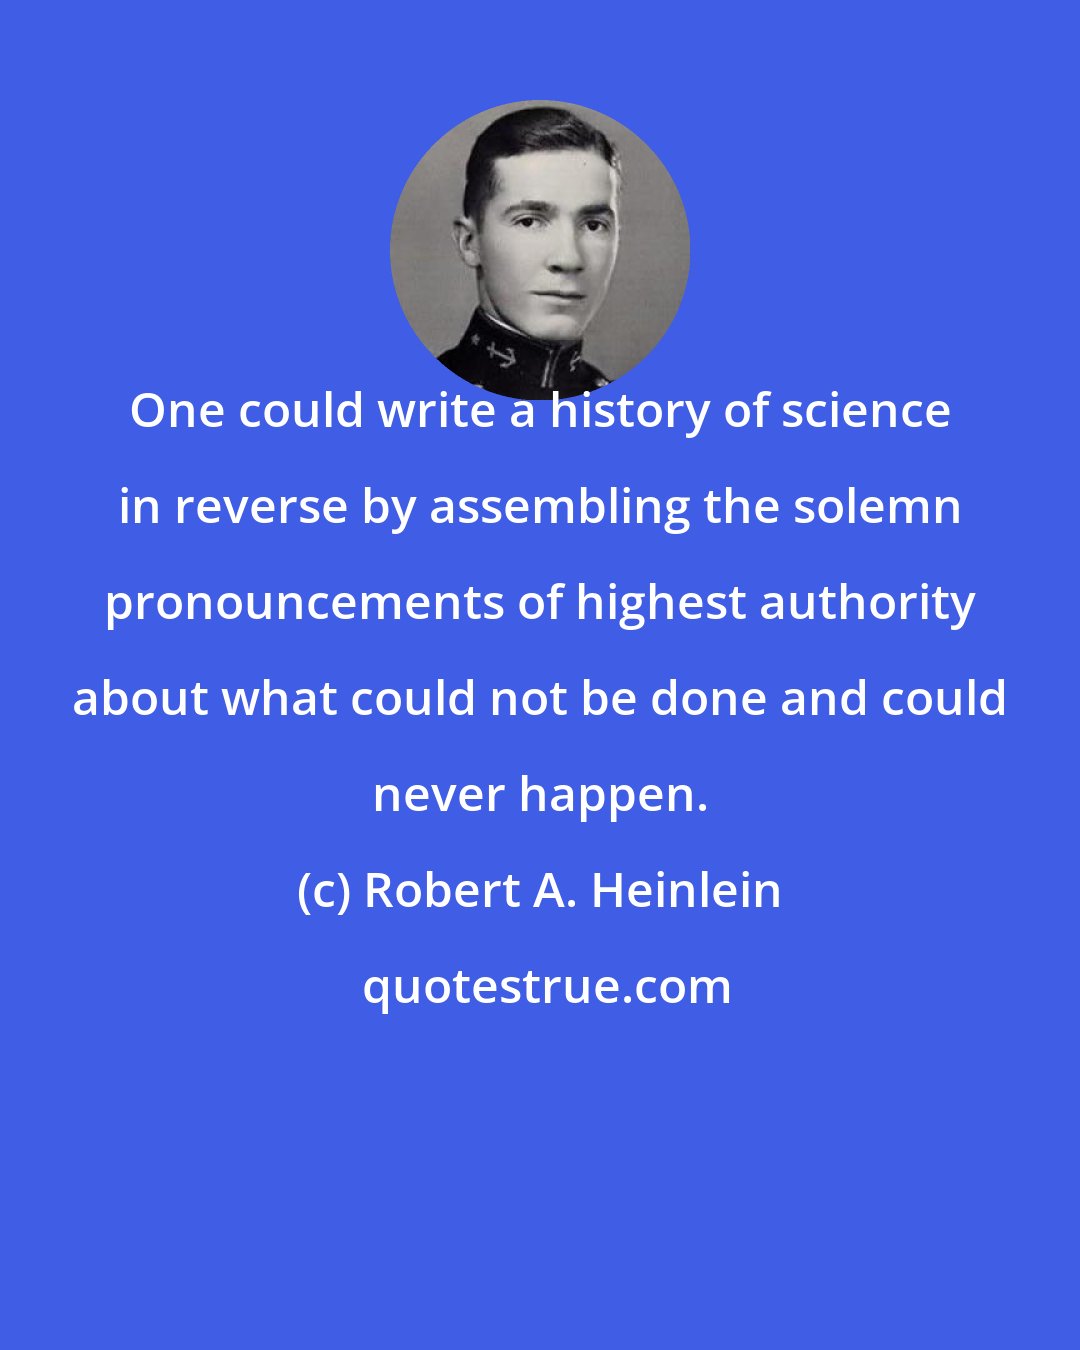 Robert A. Heinlein: One could write a history of science in reverse by assembling the solemn pronouncements of highest authority about what could not be done and could never happen.